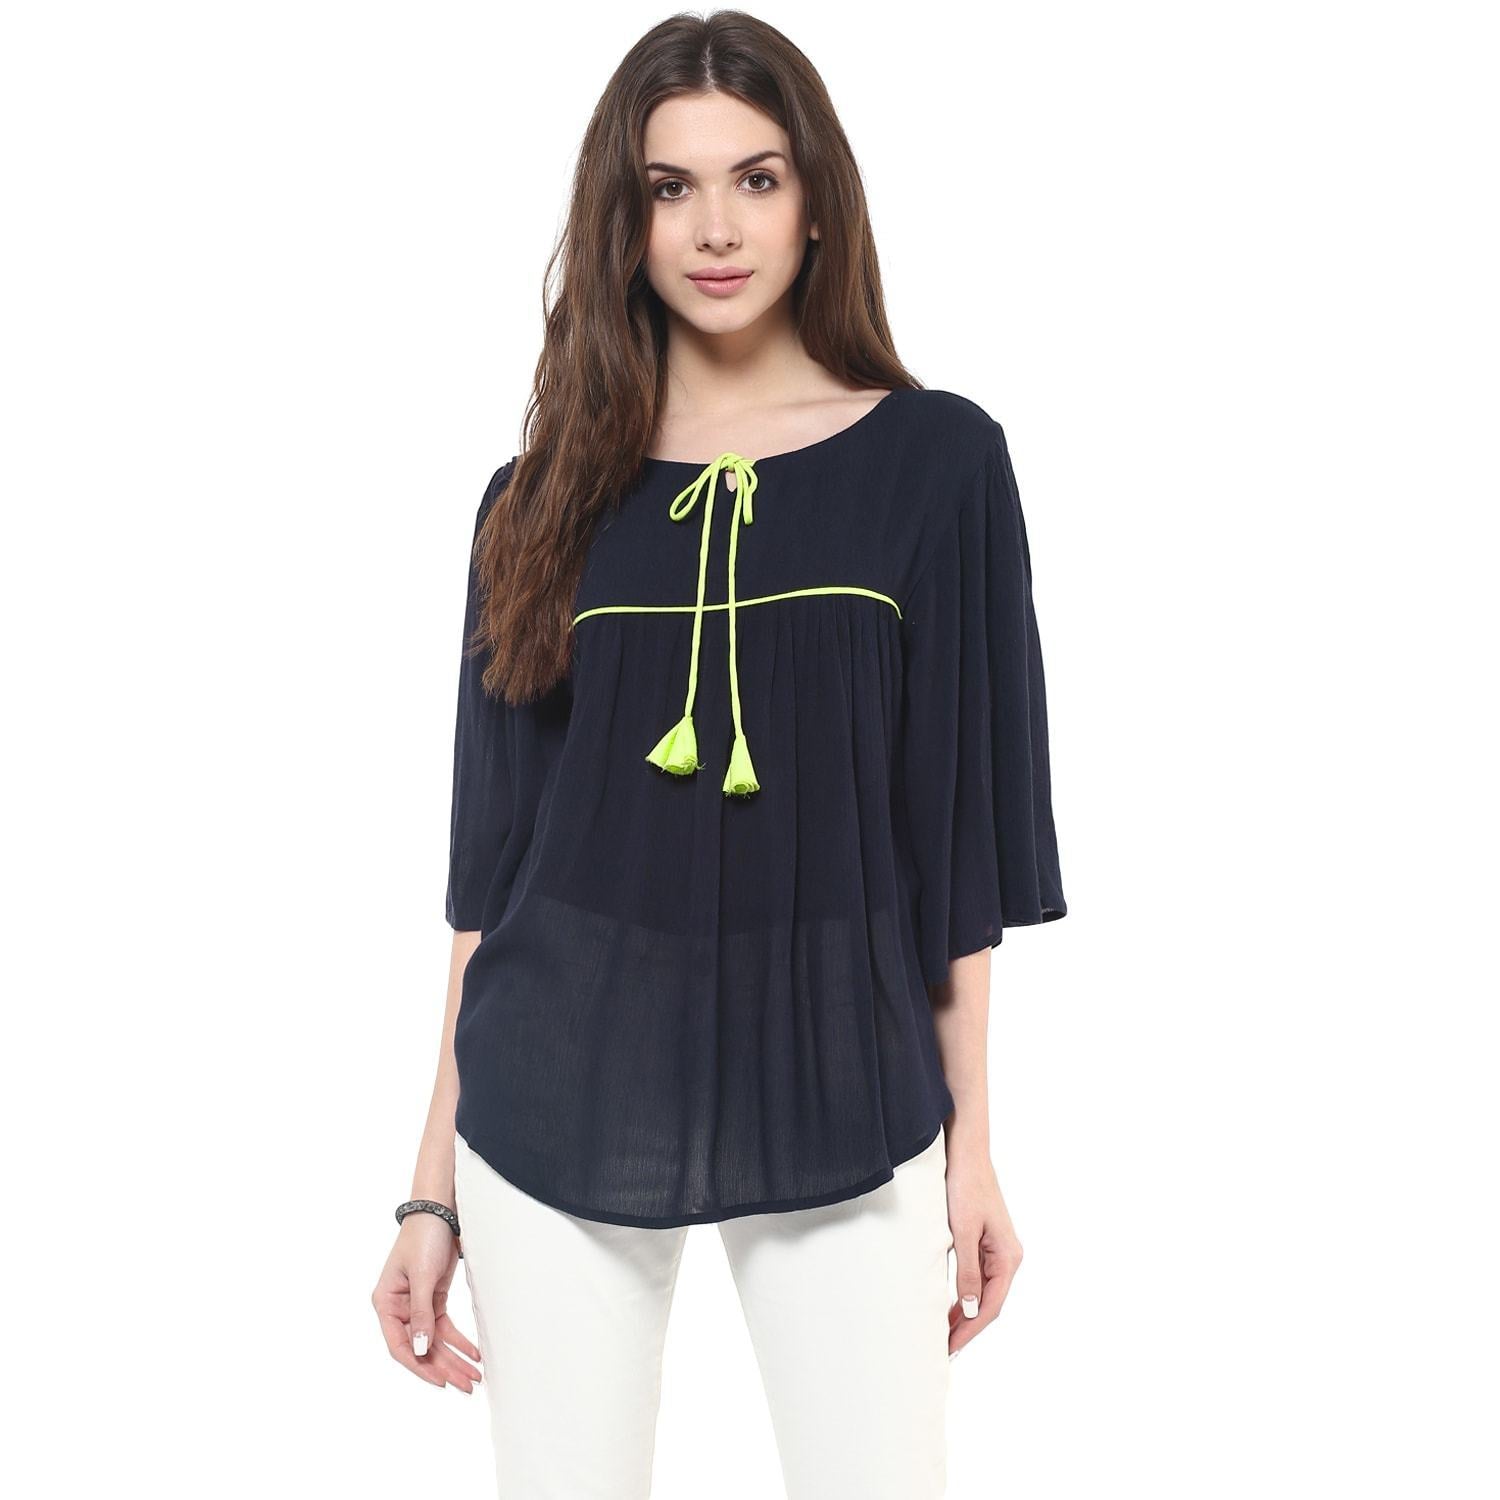 Women's Navy Flare Solid Top - Pannkh